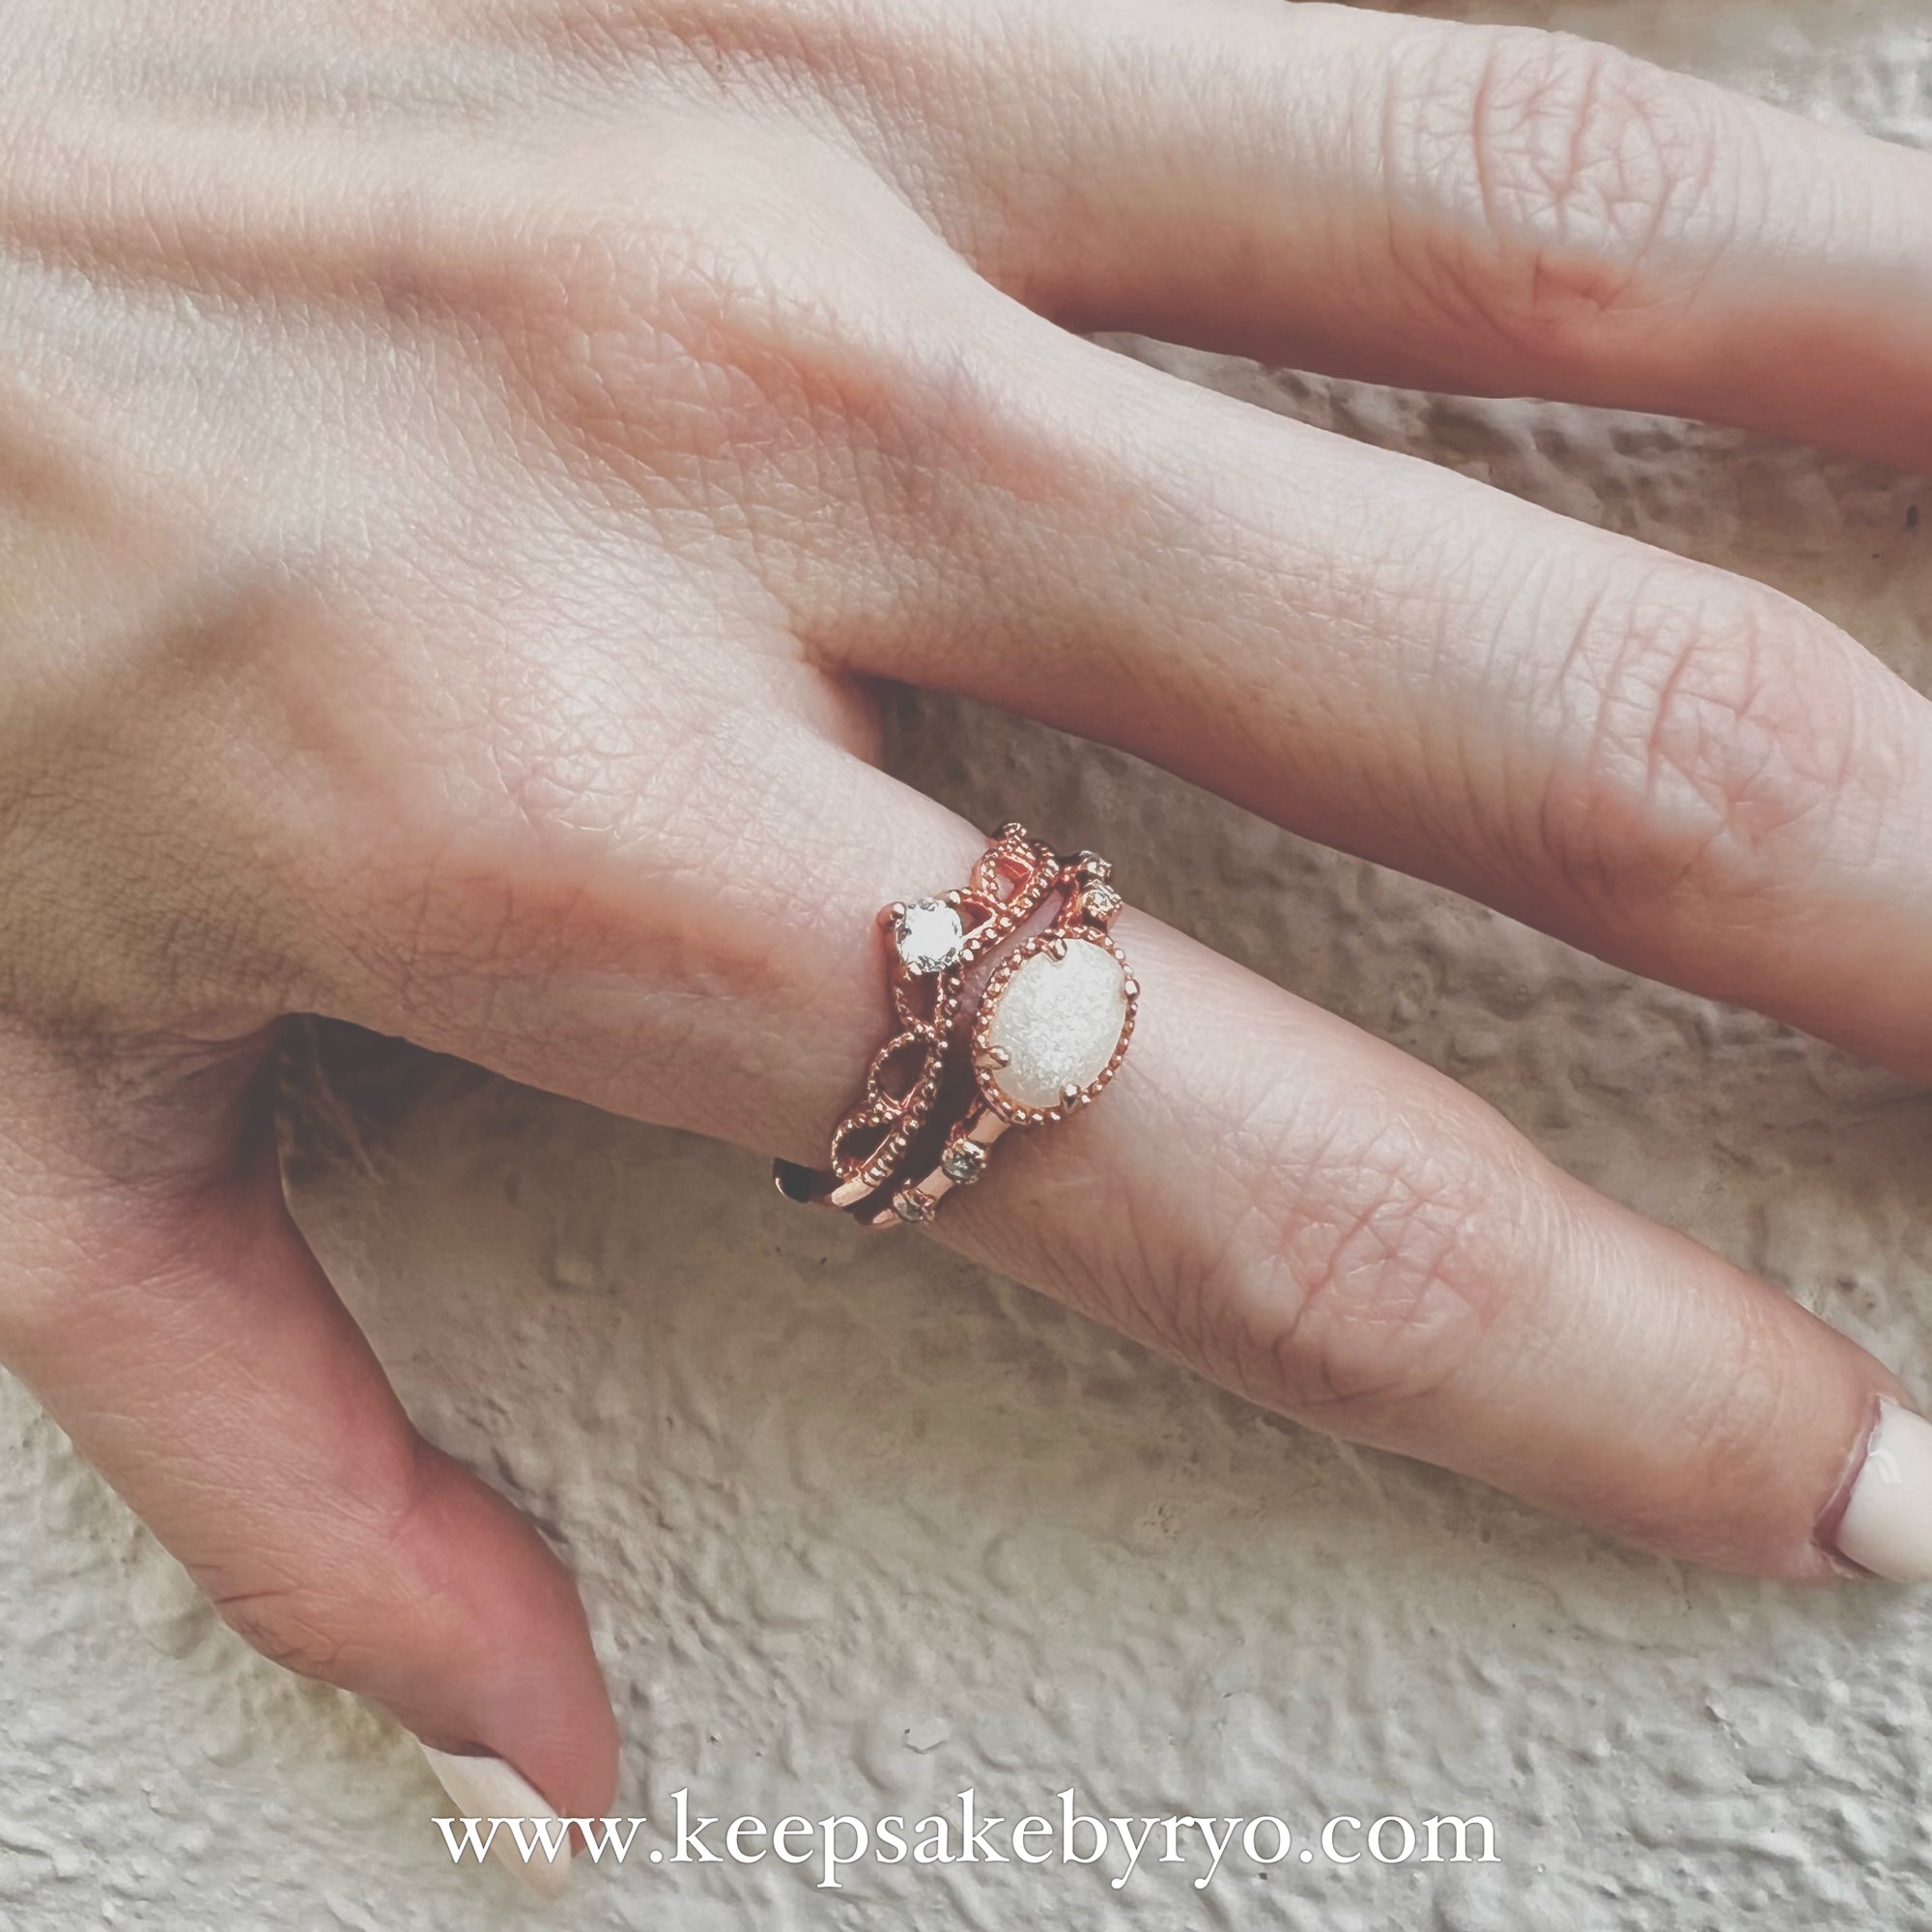 SOLITAIRE: AYAKO STACKING DUO RINGS WITH OVAL SOLITAIRE